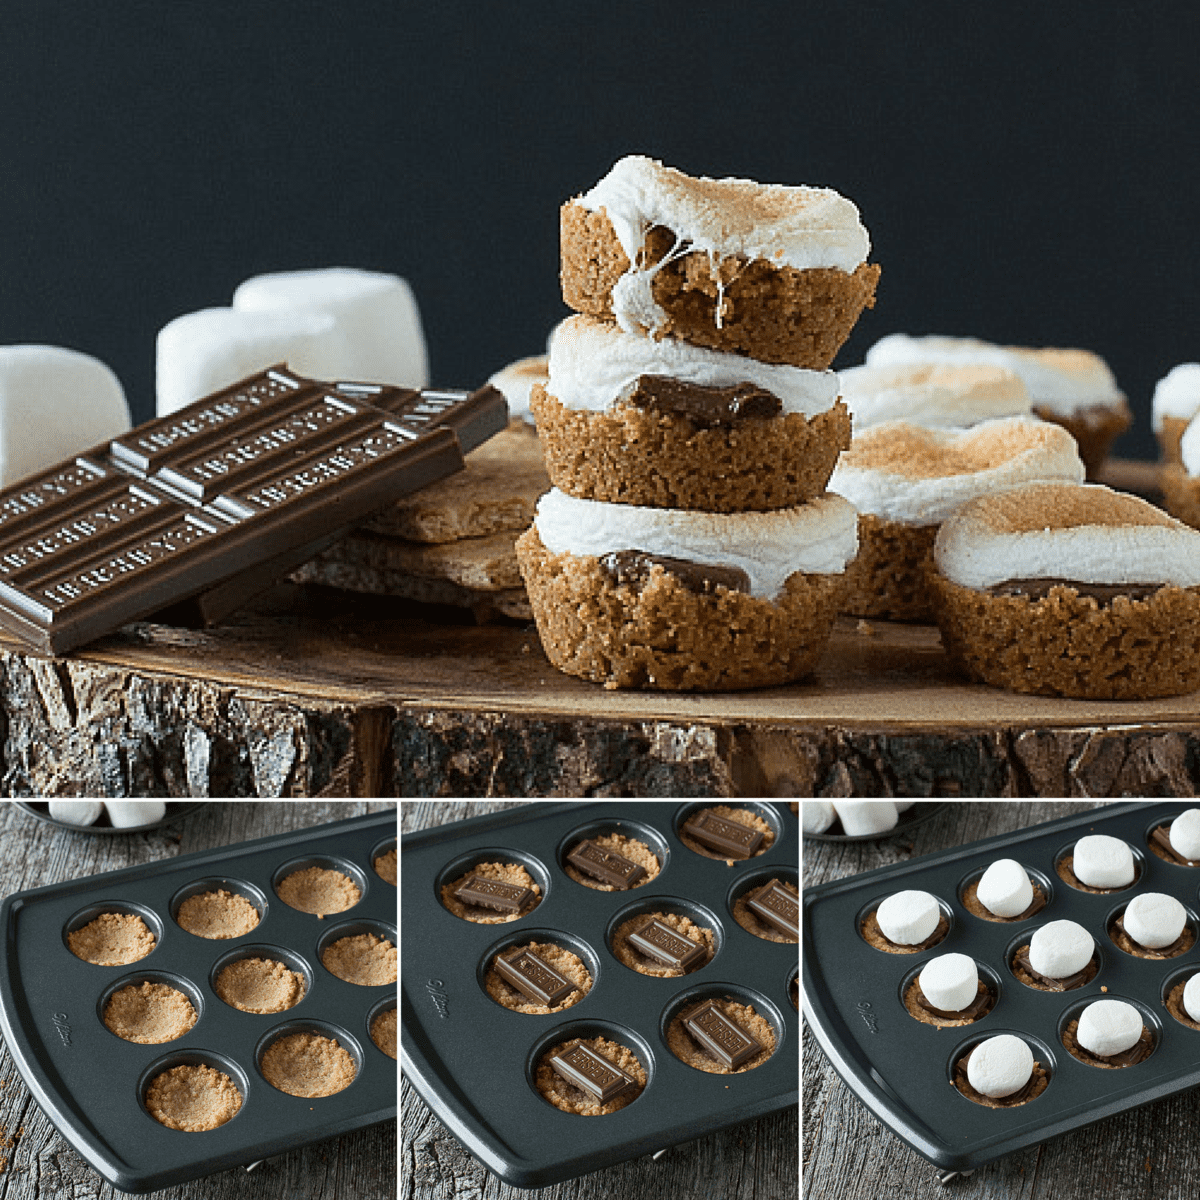 https://thefirstyearblog.com/wp-content/uploads/2013/08/smores-bites-3.png